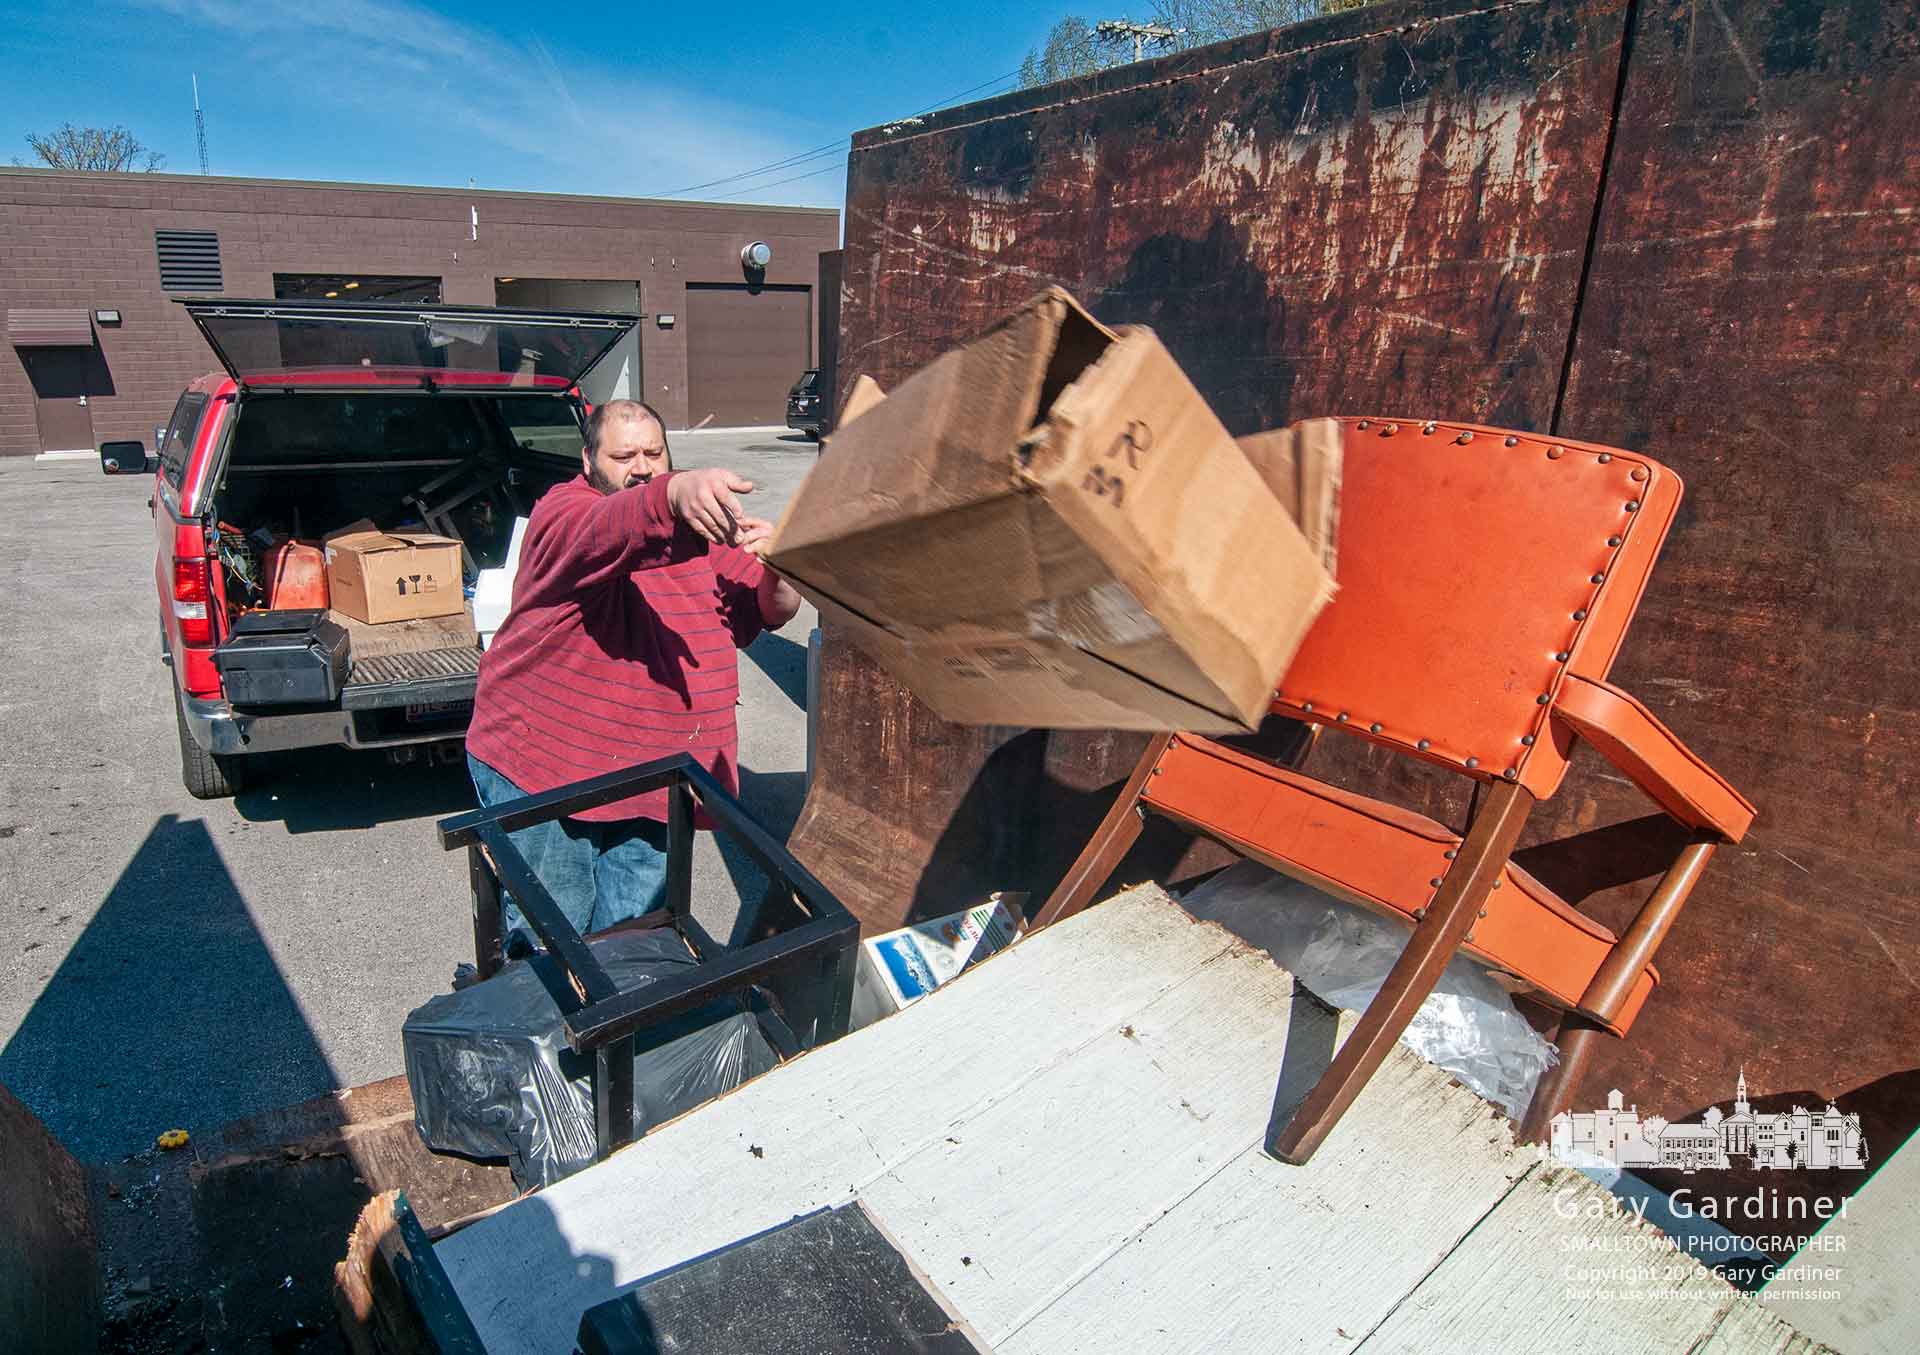 A man tosses a box of household waste into a trash container at the Blendon Township Service Department during the township's Community Cleanup Days where residents could get rid of old tires, medicines, trash, and documents for shredding. My Final Photo for April 27, 2019.